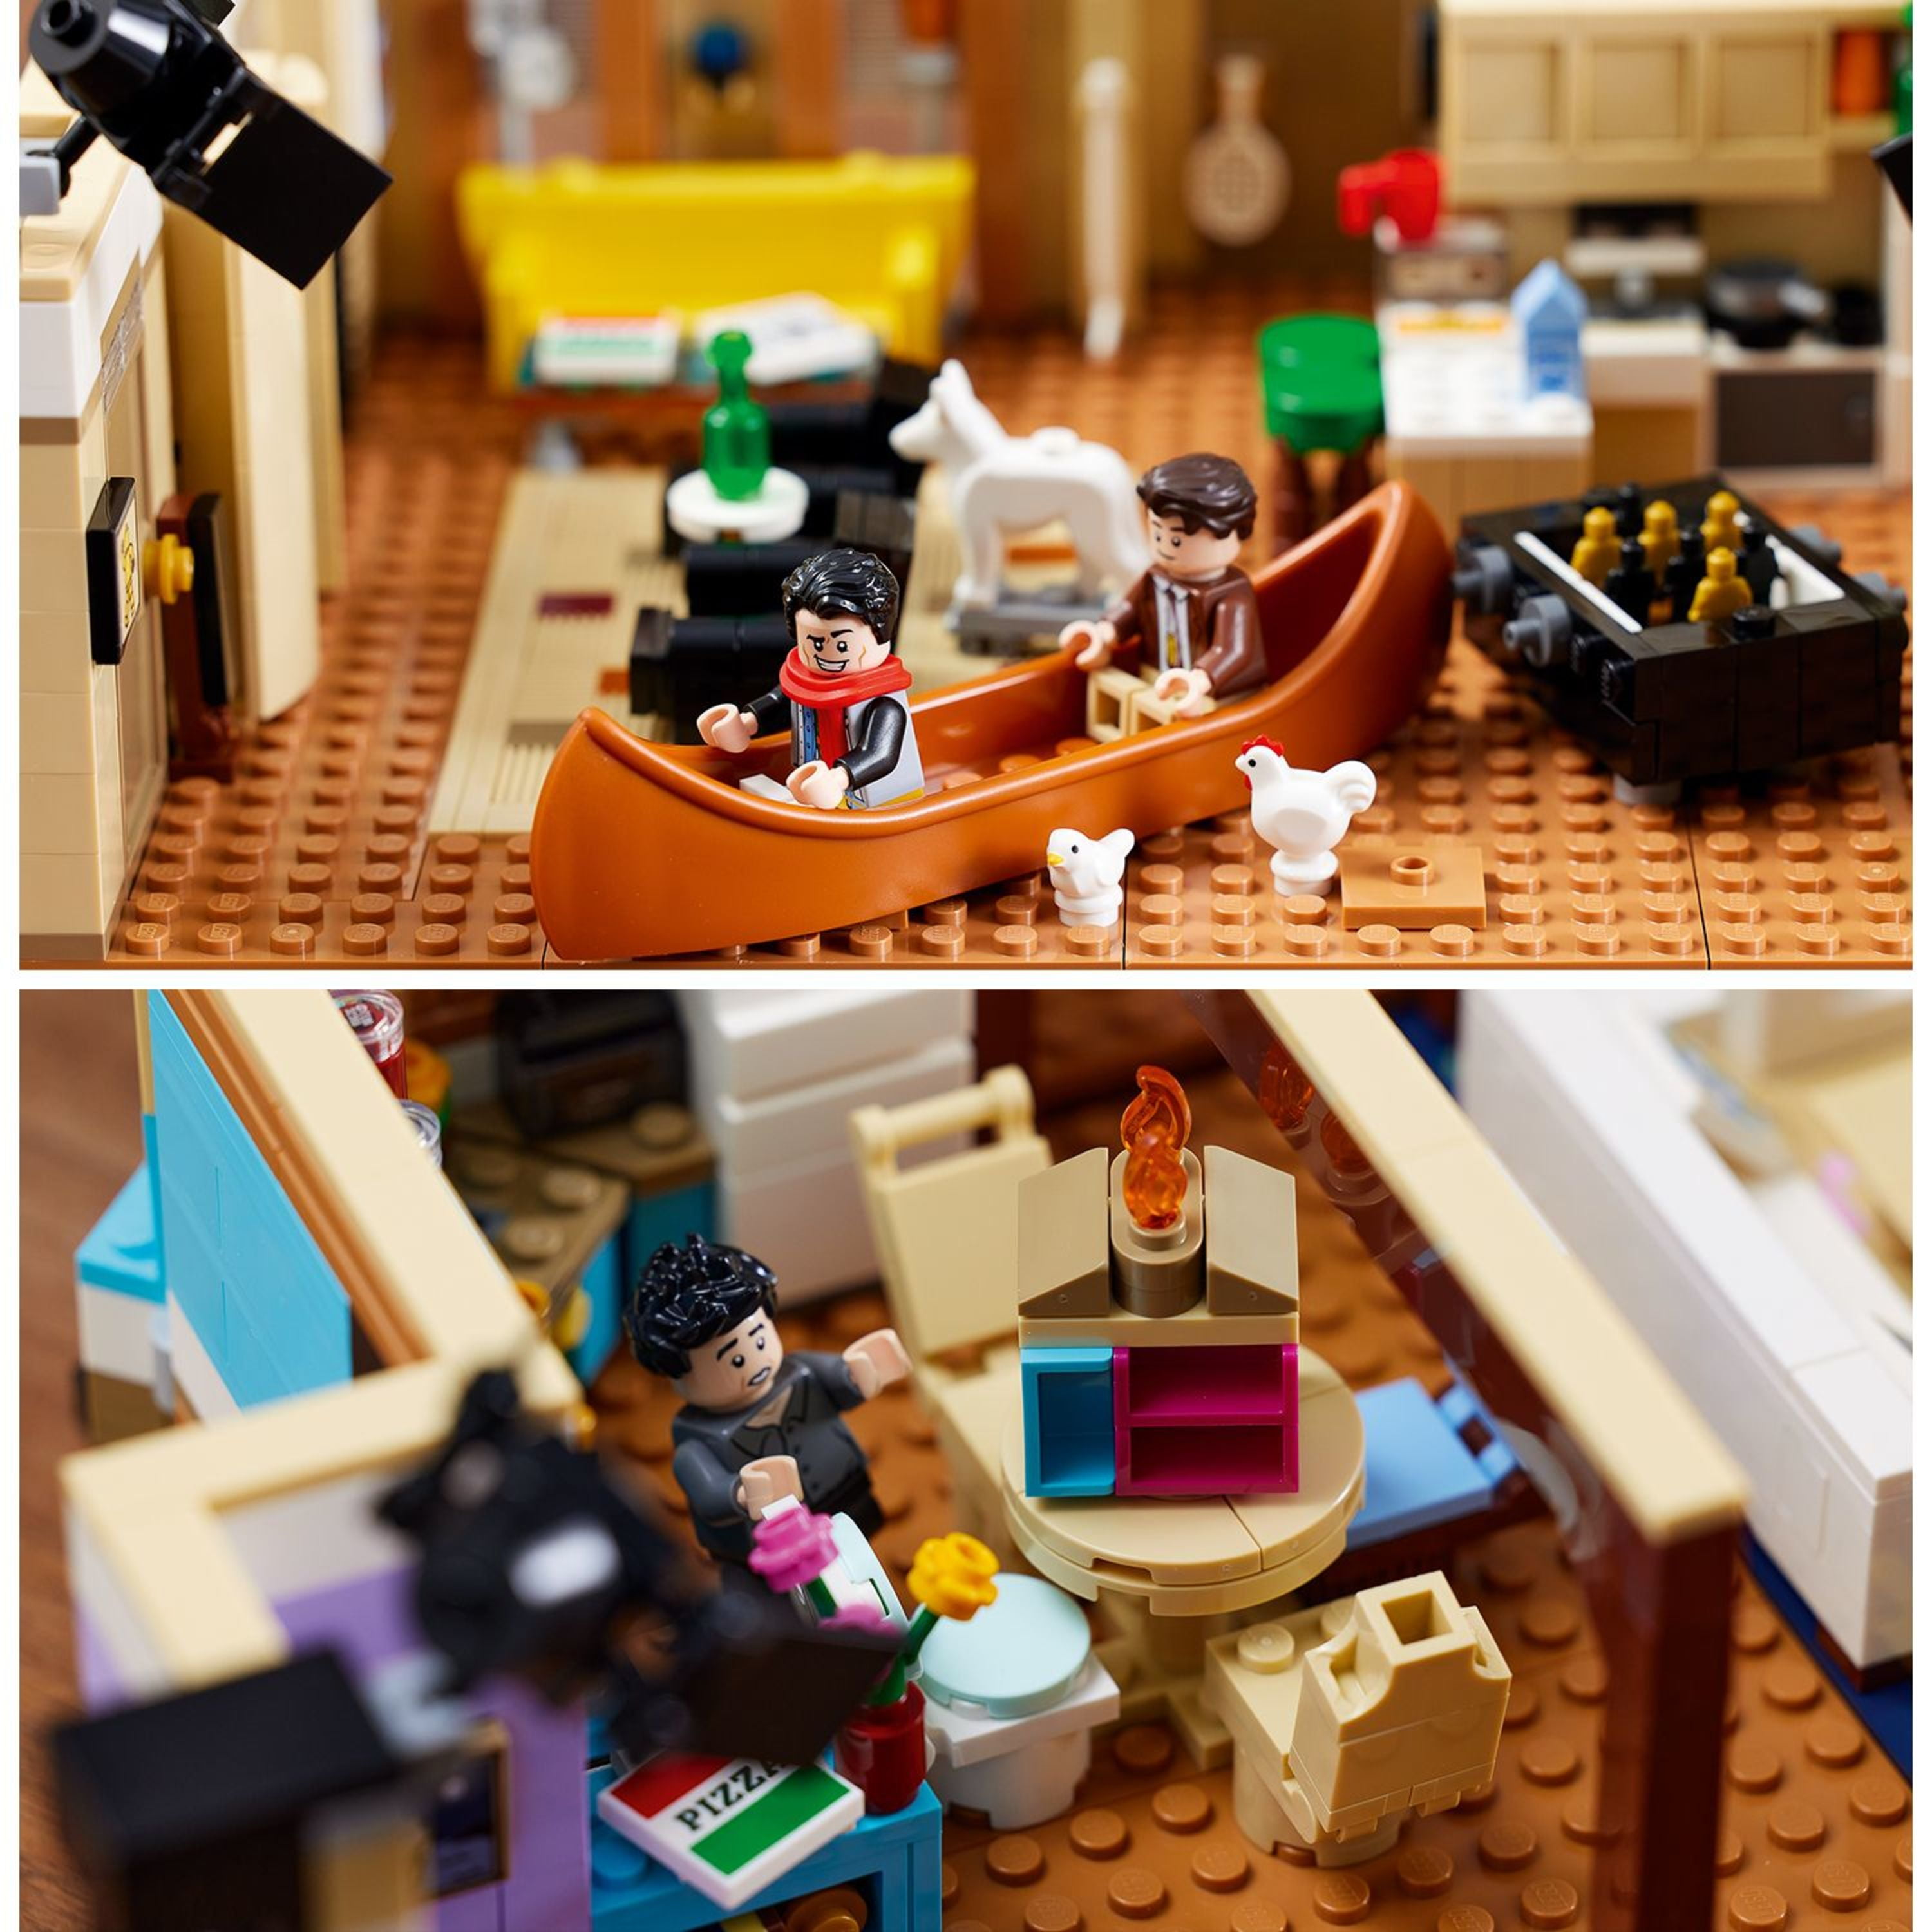 The FRIENDS Apartments in Lego - Monica's apartment 